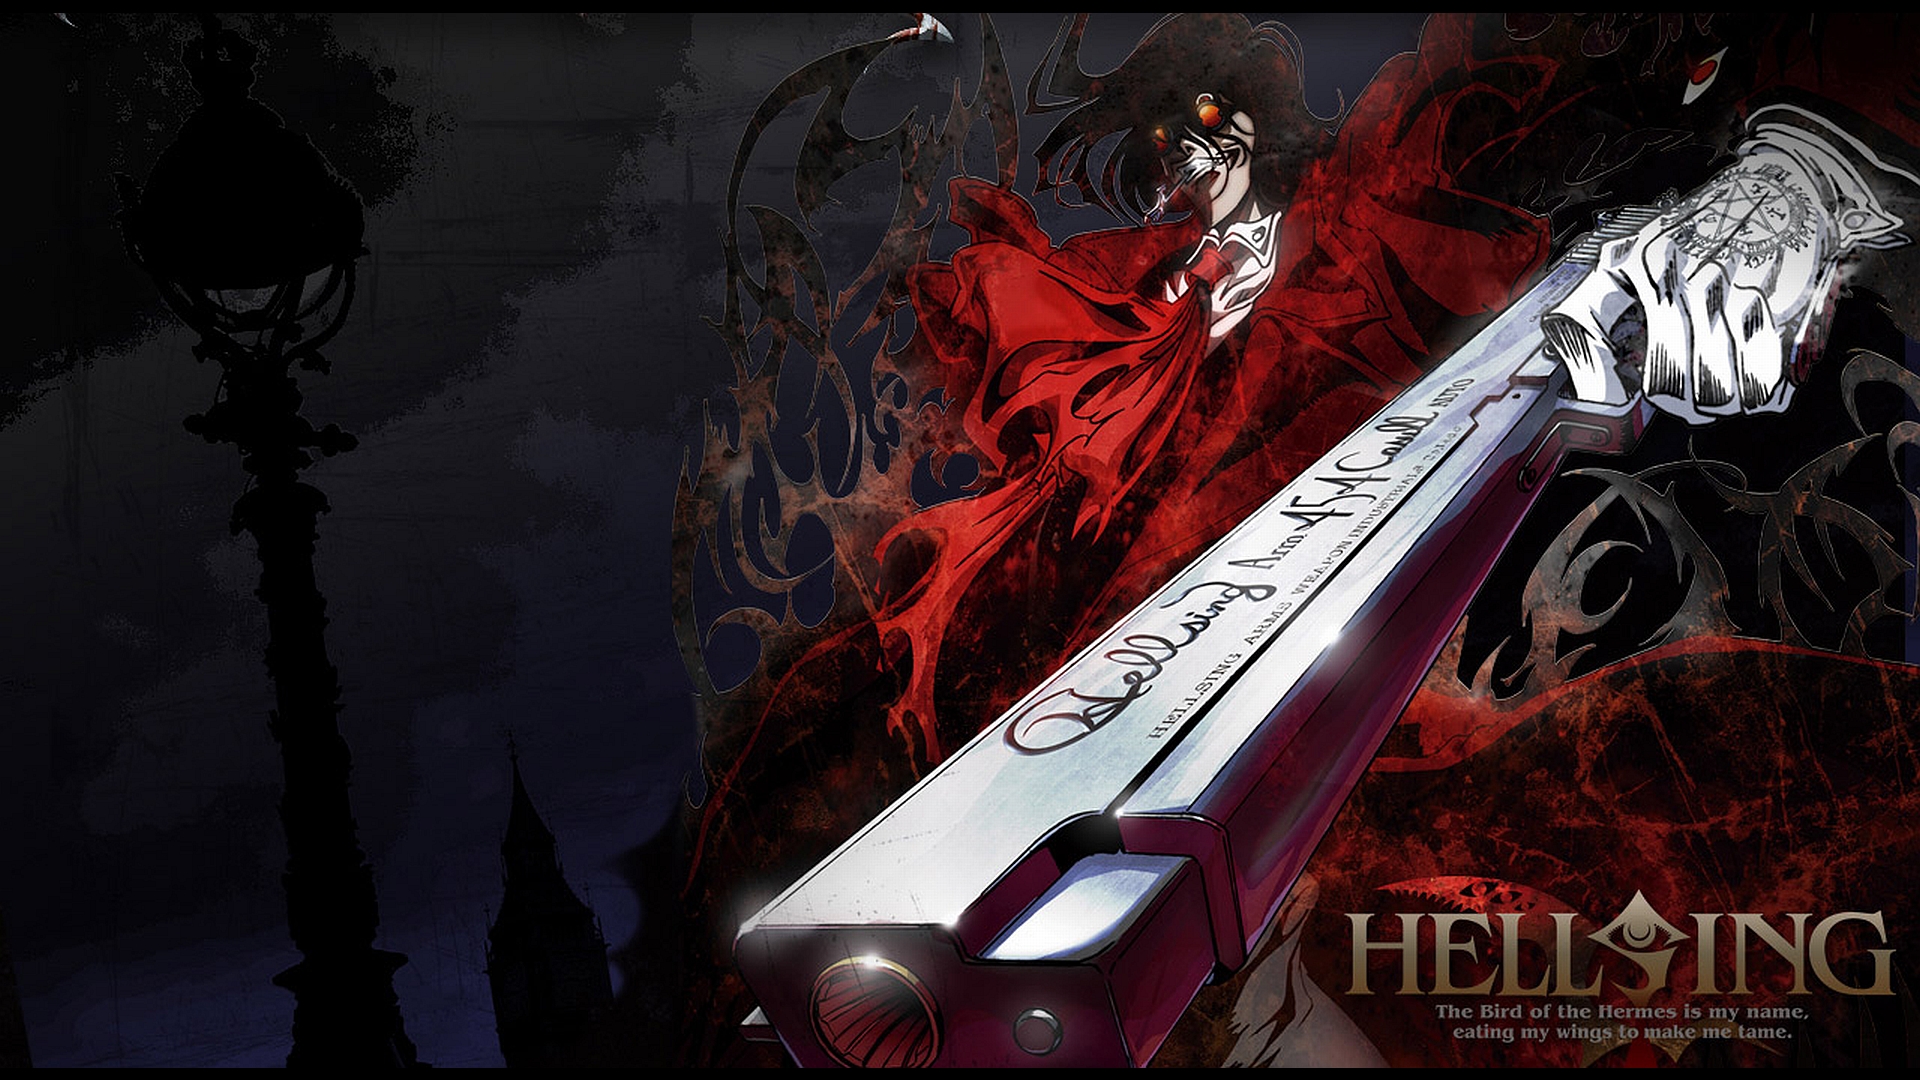 Dark and mysterious anime wallpaper featuring a Hellsing character.